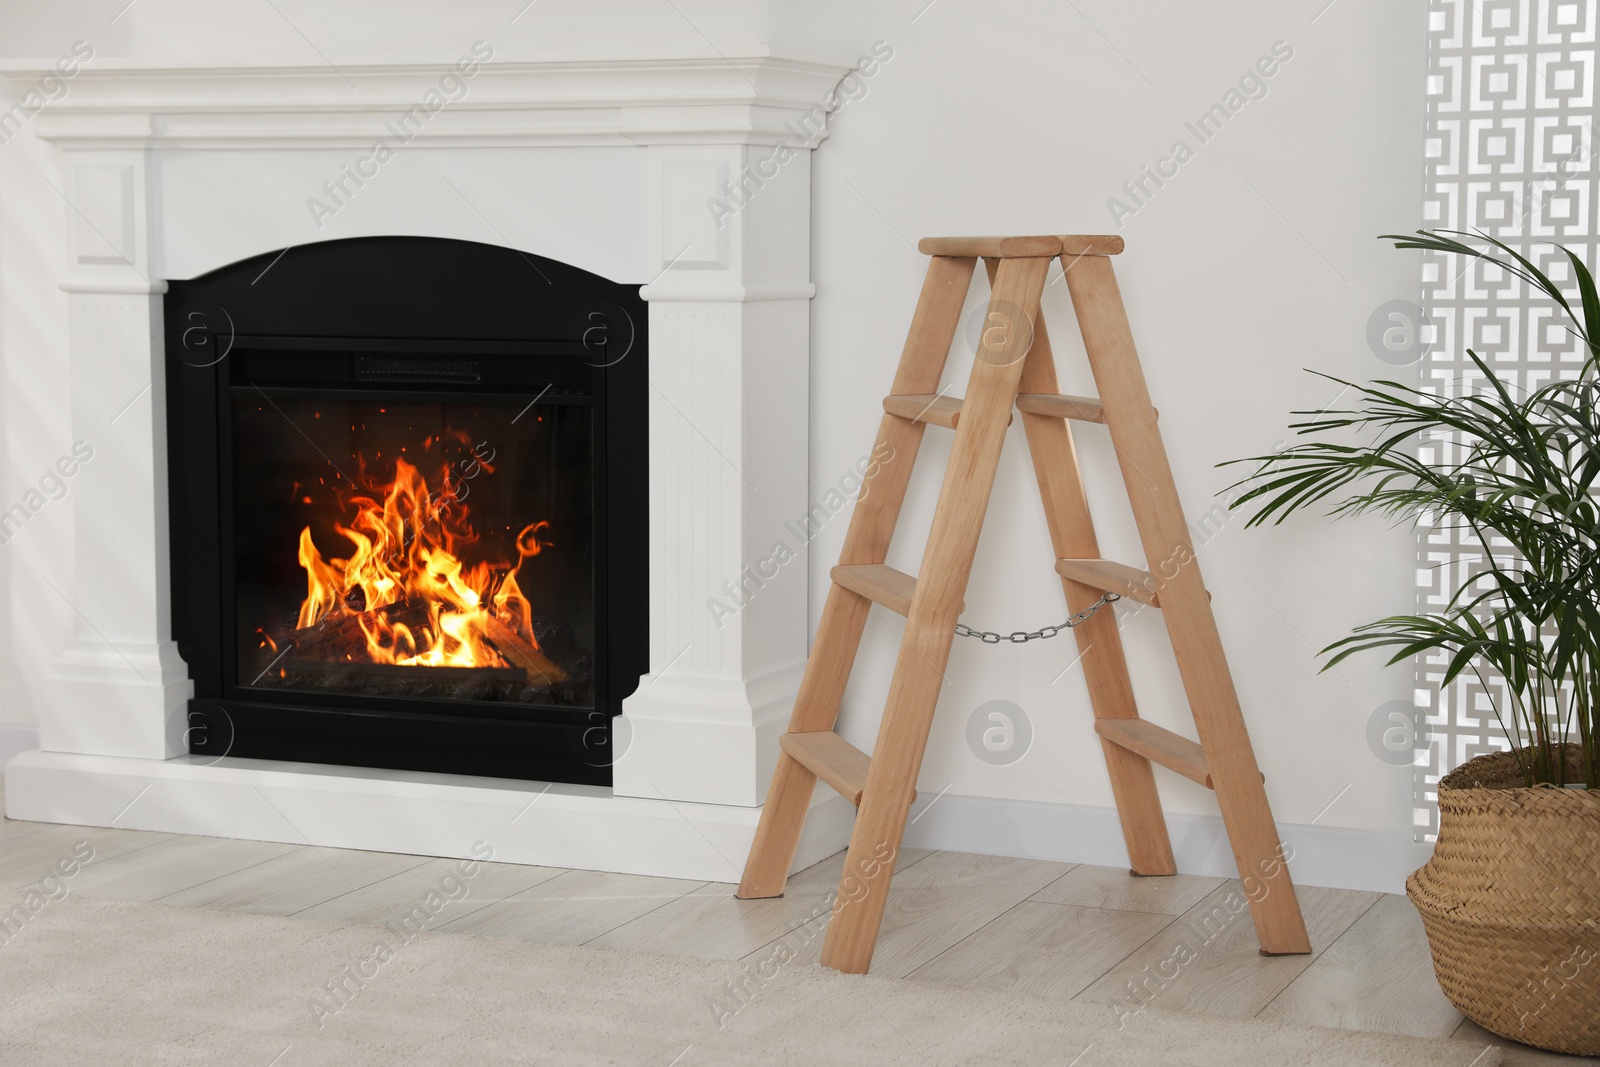 Photo of Wooden folding ladder near fireplace and potted plant in room